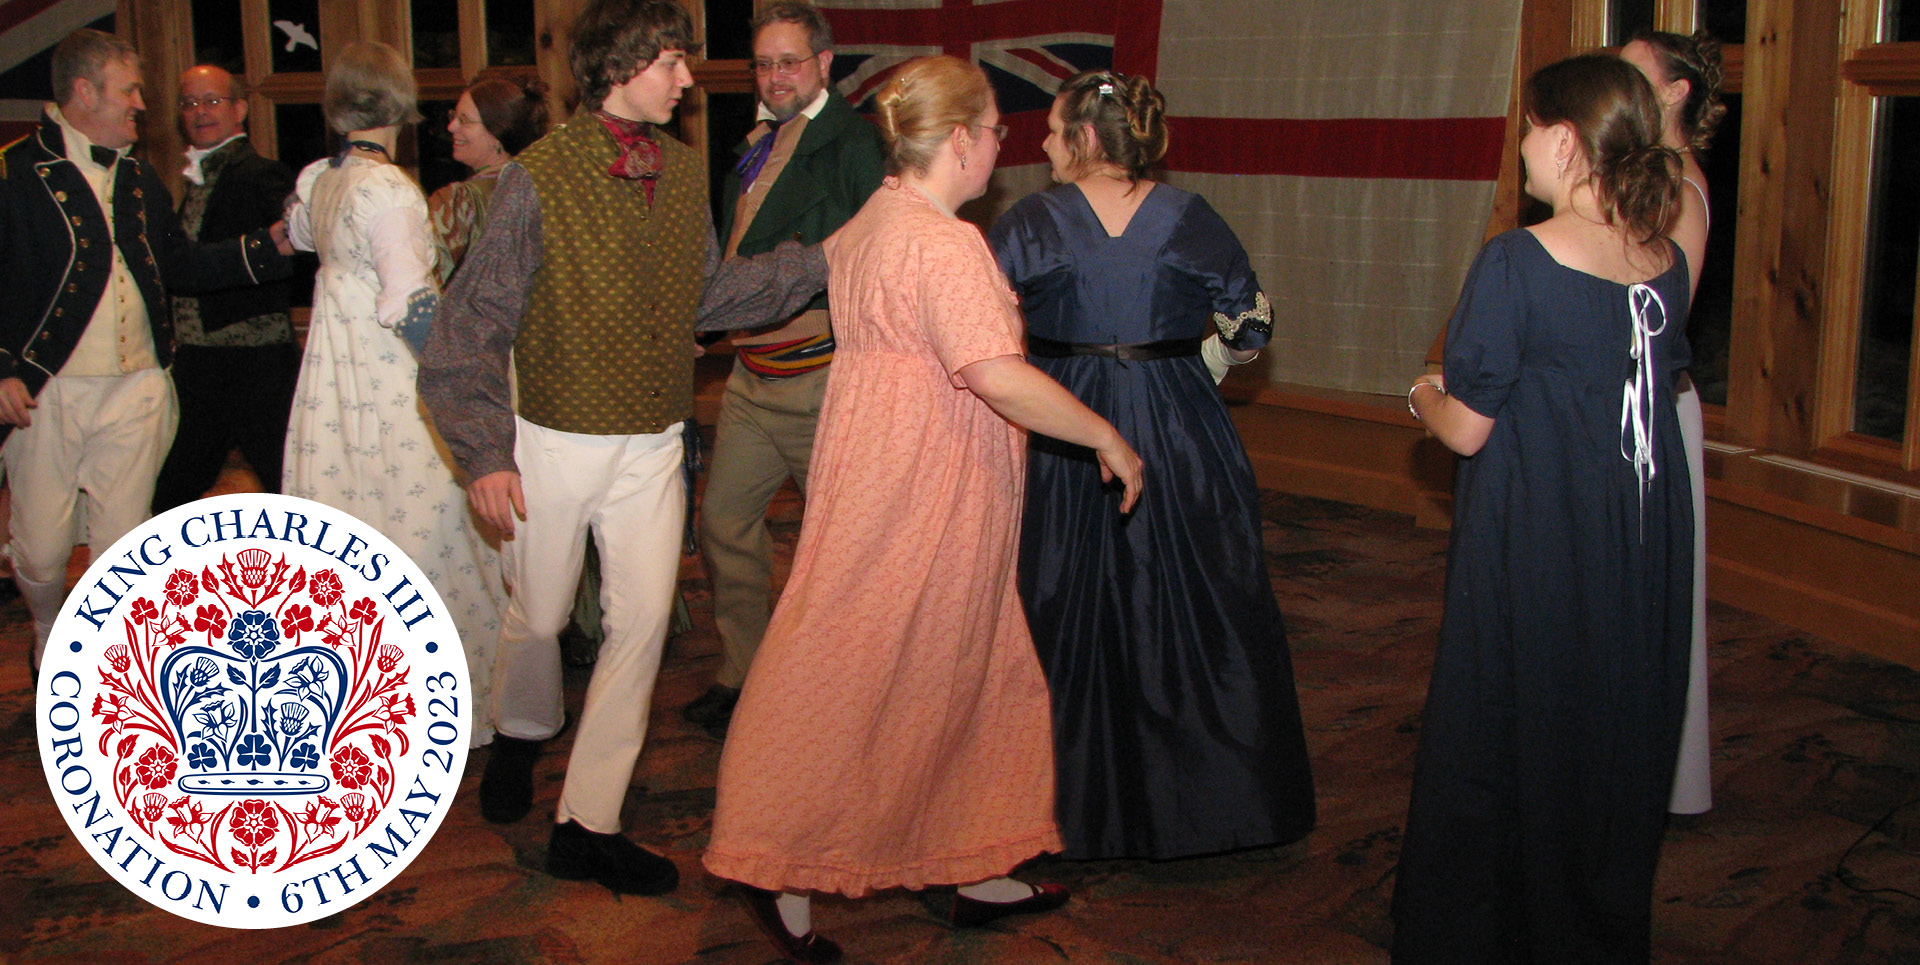 Dancers in historical dress have a good time